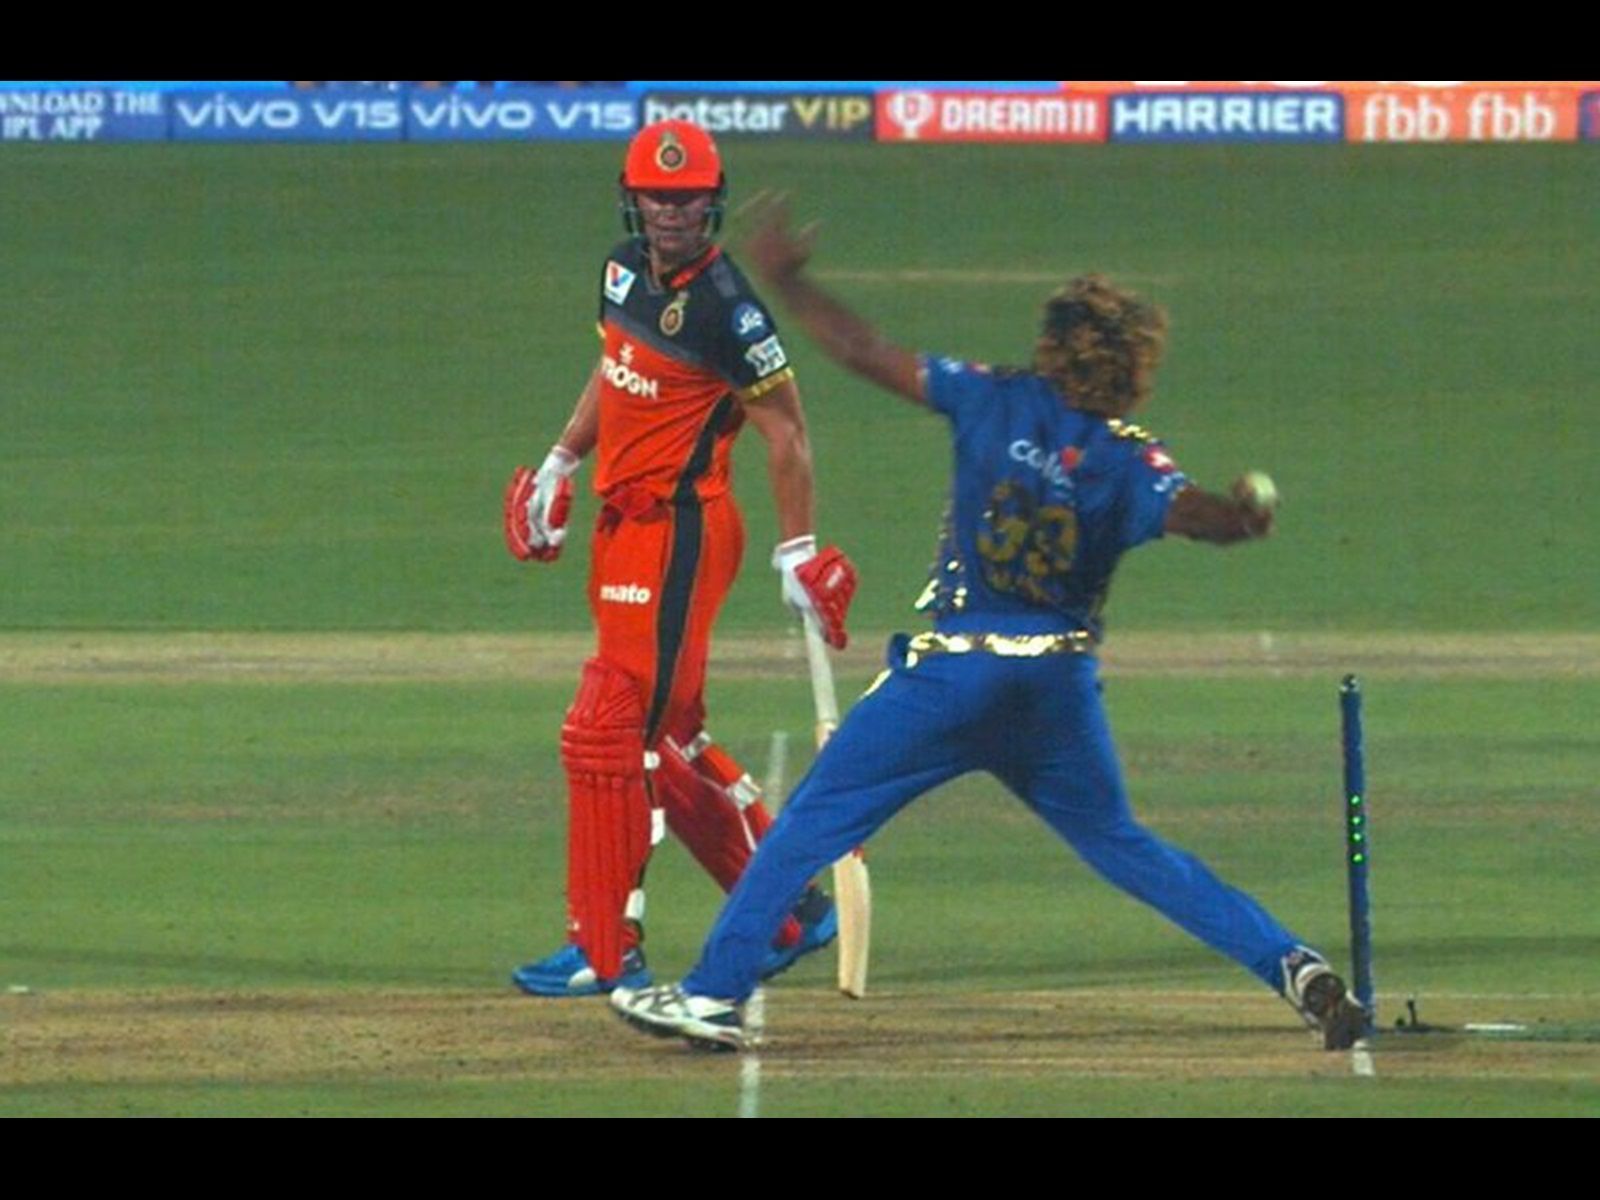 A no-ball bowled by Lasith Malinga off the final ball wasn&#039;t spotted by the umpires, potentially costing RCB the match. (Source: BCCI)